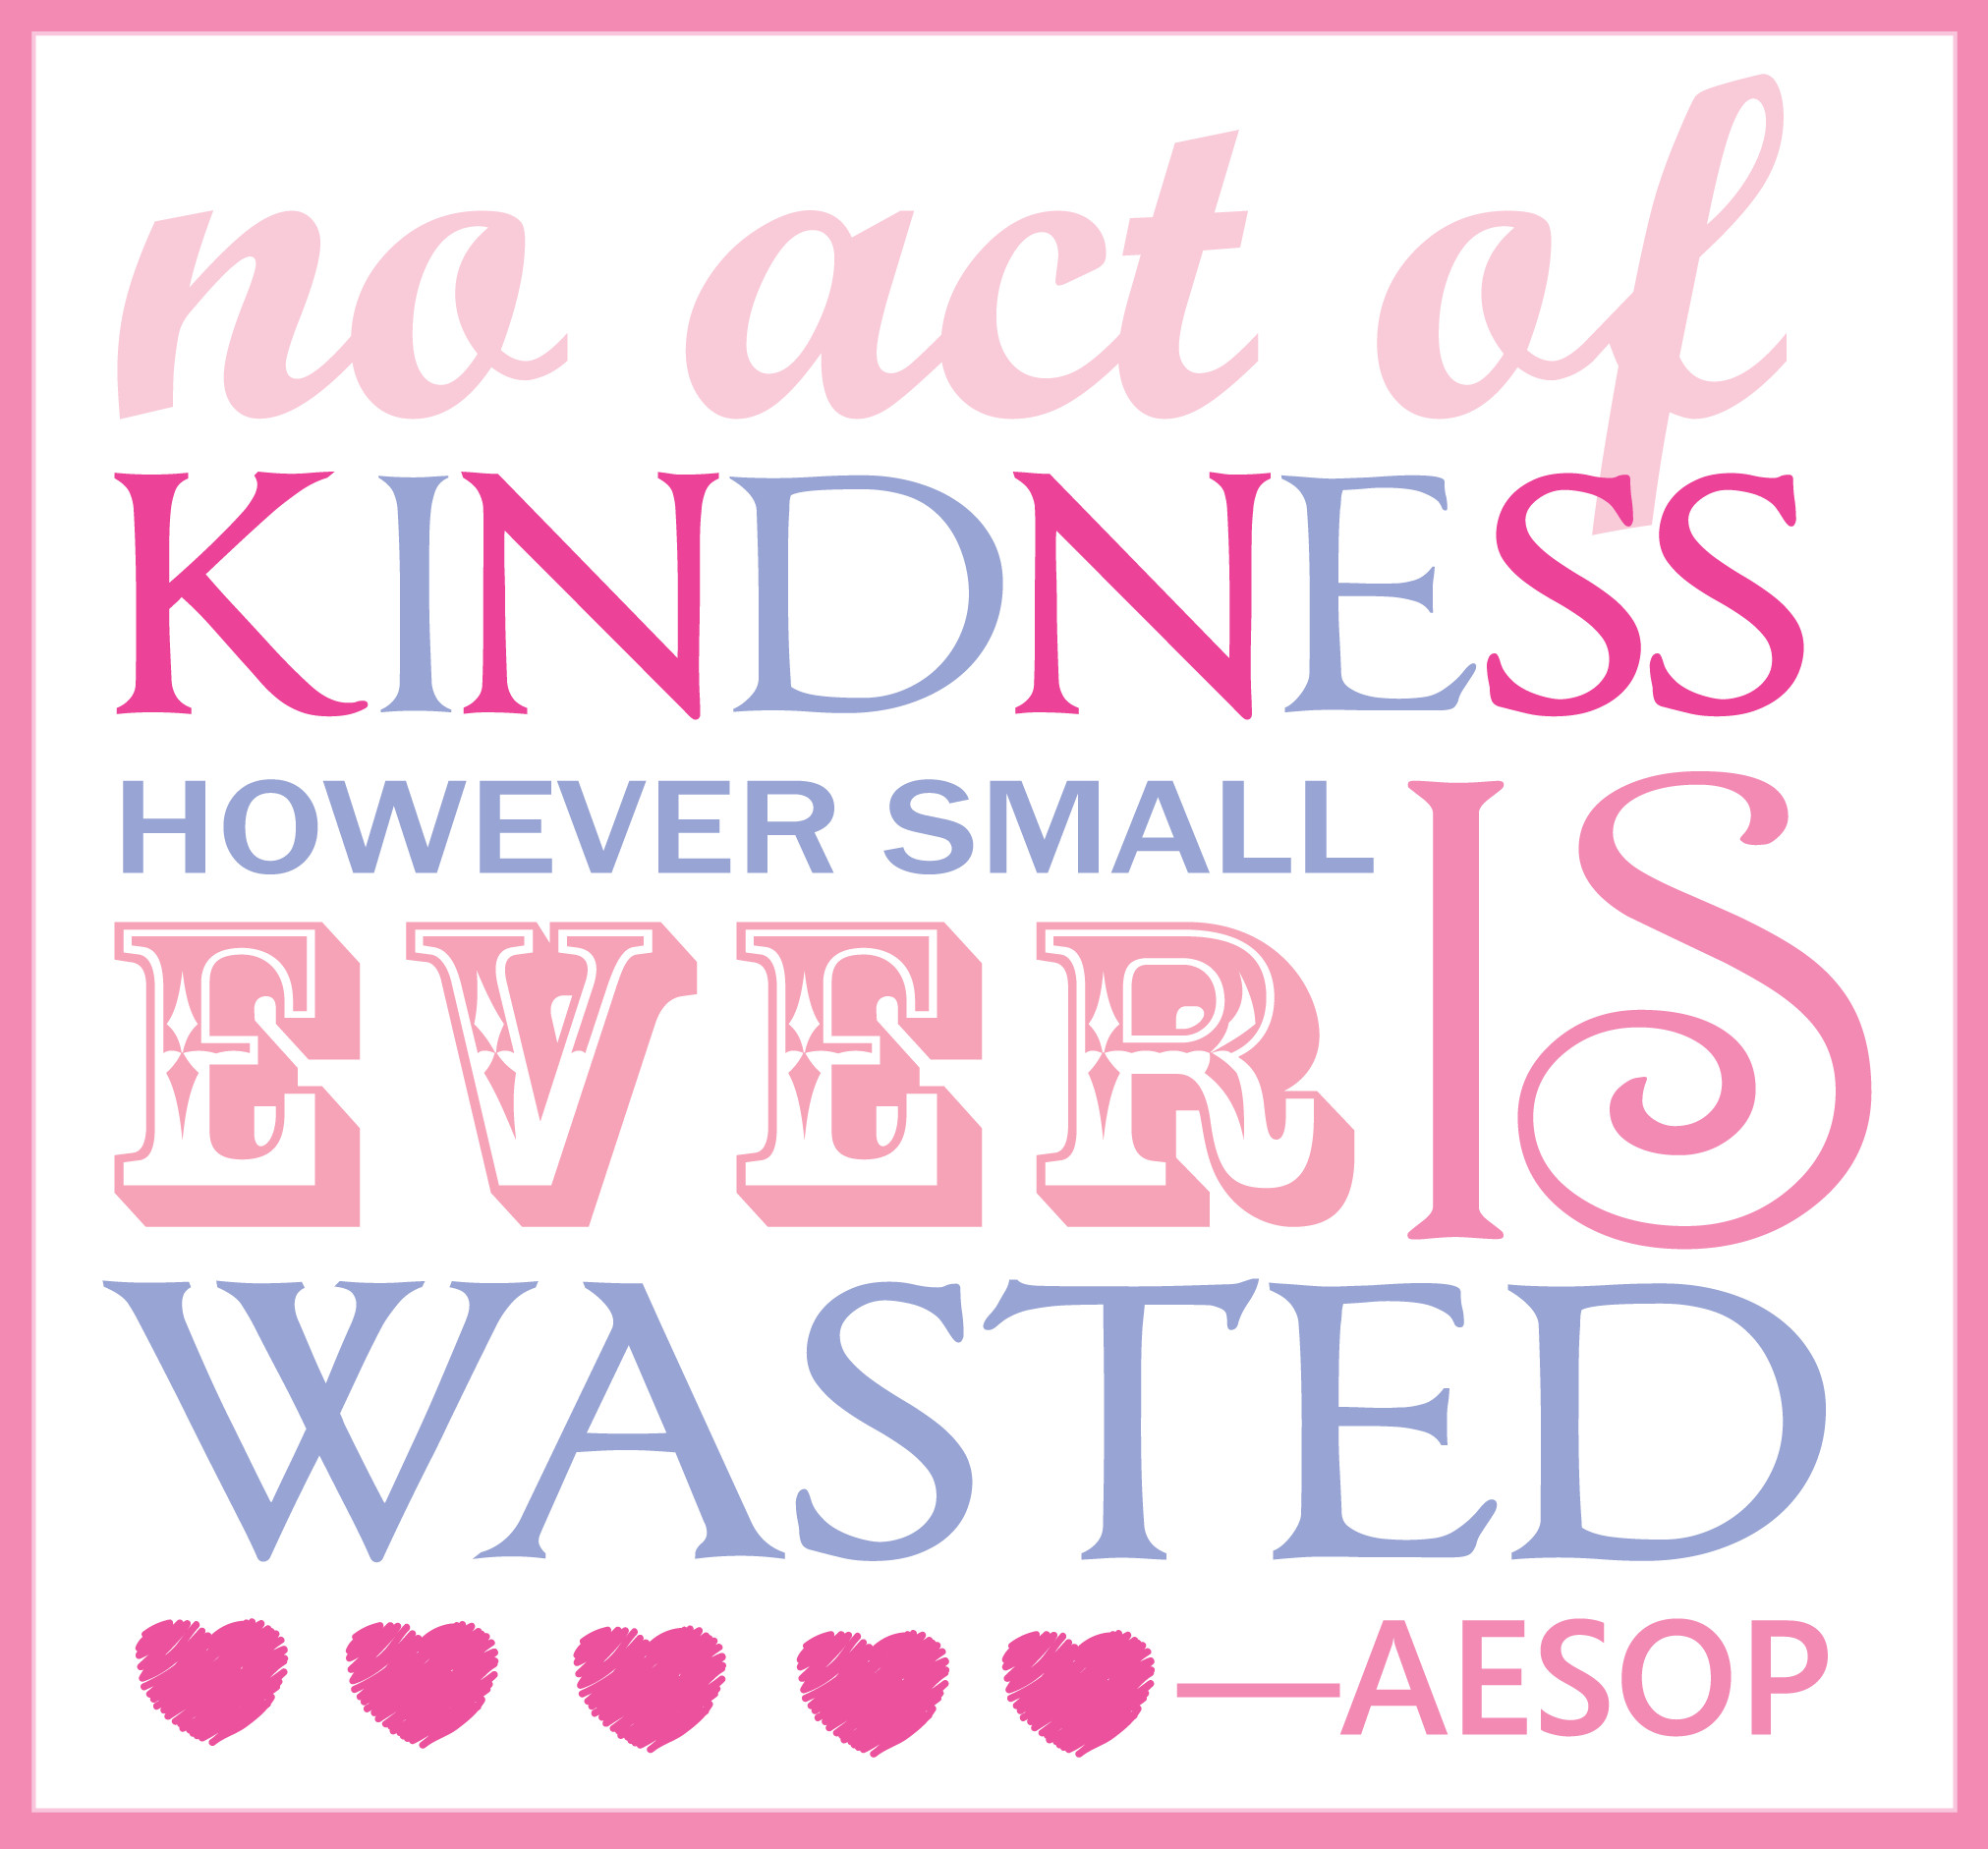 Quote About Random Acts Of Kindness
 10 Random Acts of Kindness